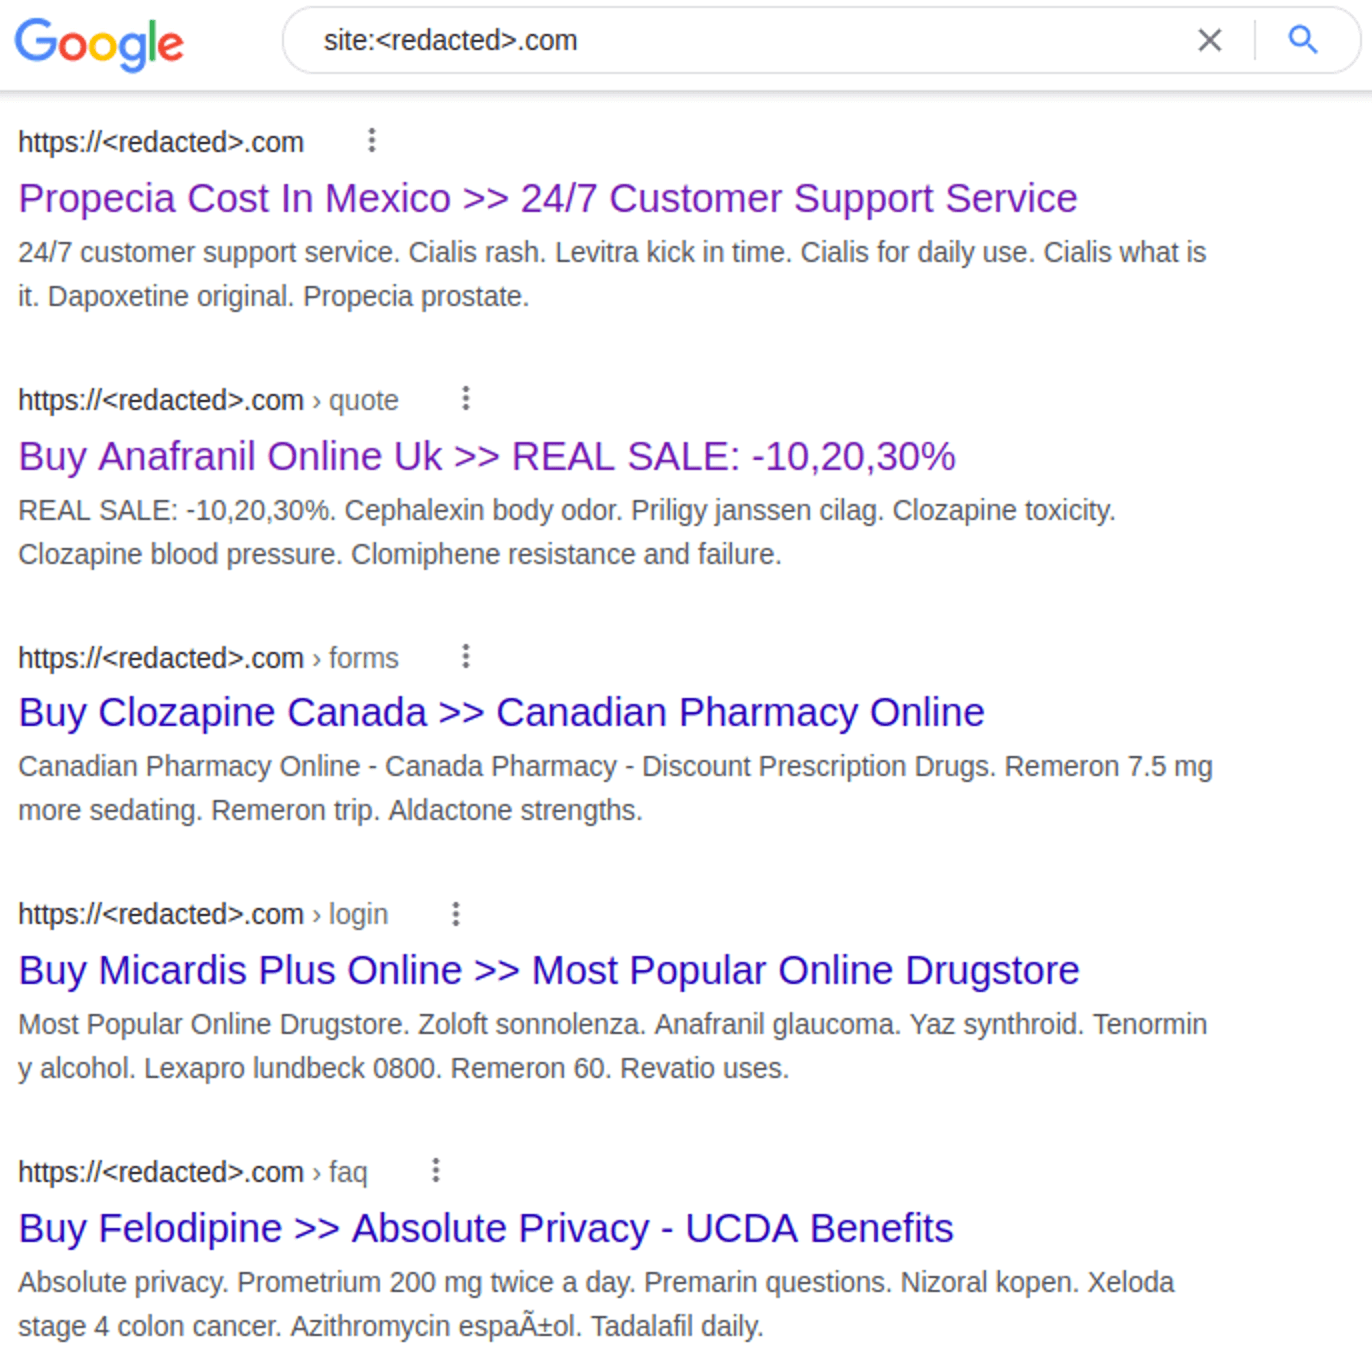 polluted search results from cloaked spam